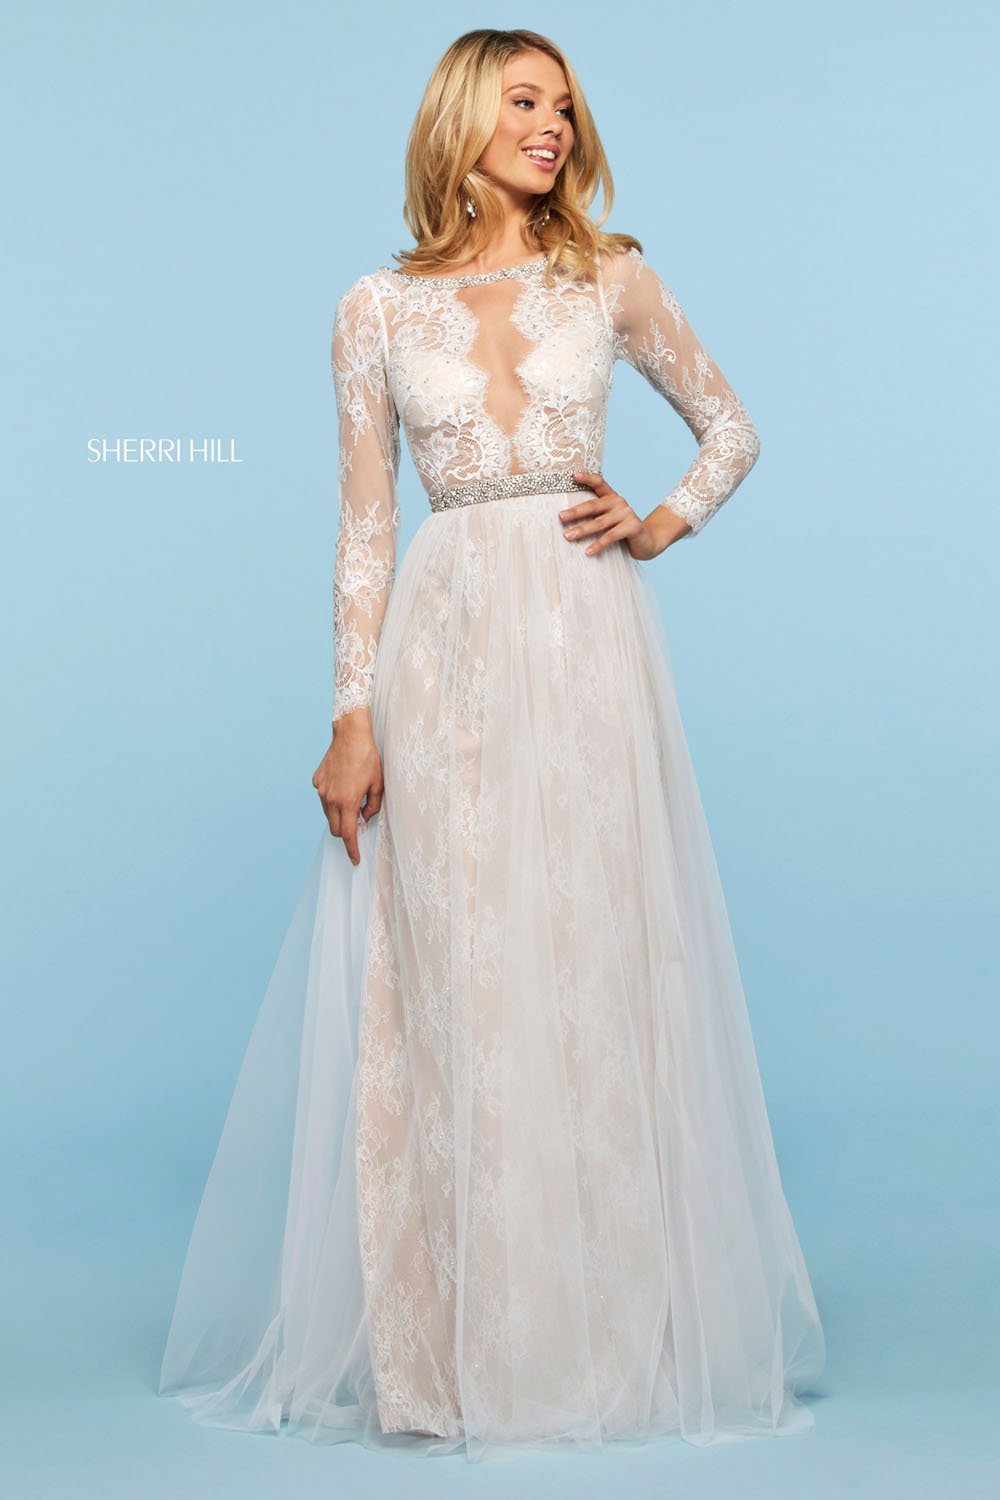 Sherri Hill 53565 dress images in these colors: Ivory, Black, Blush.